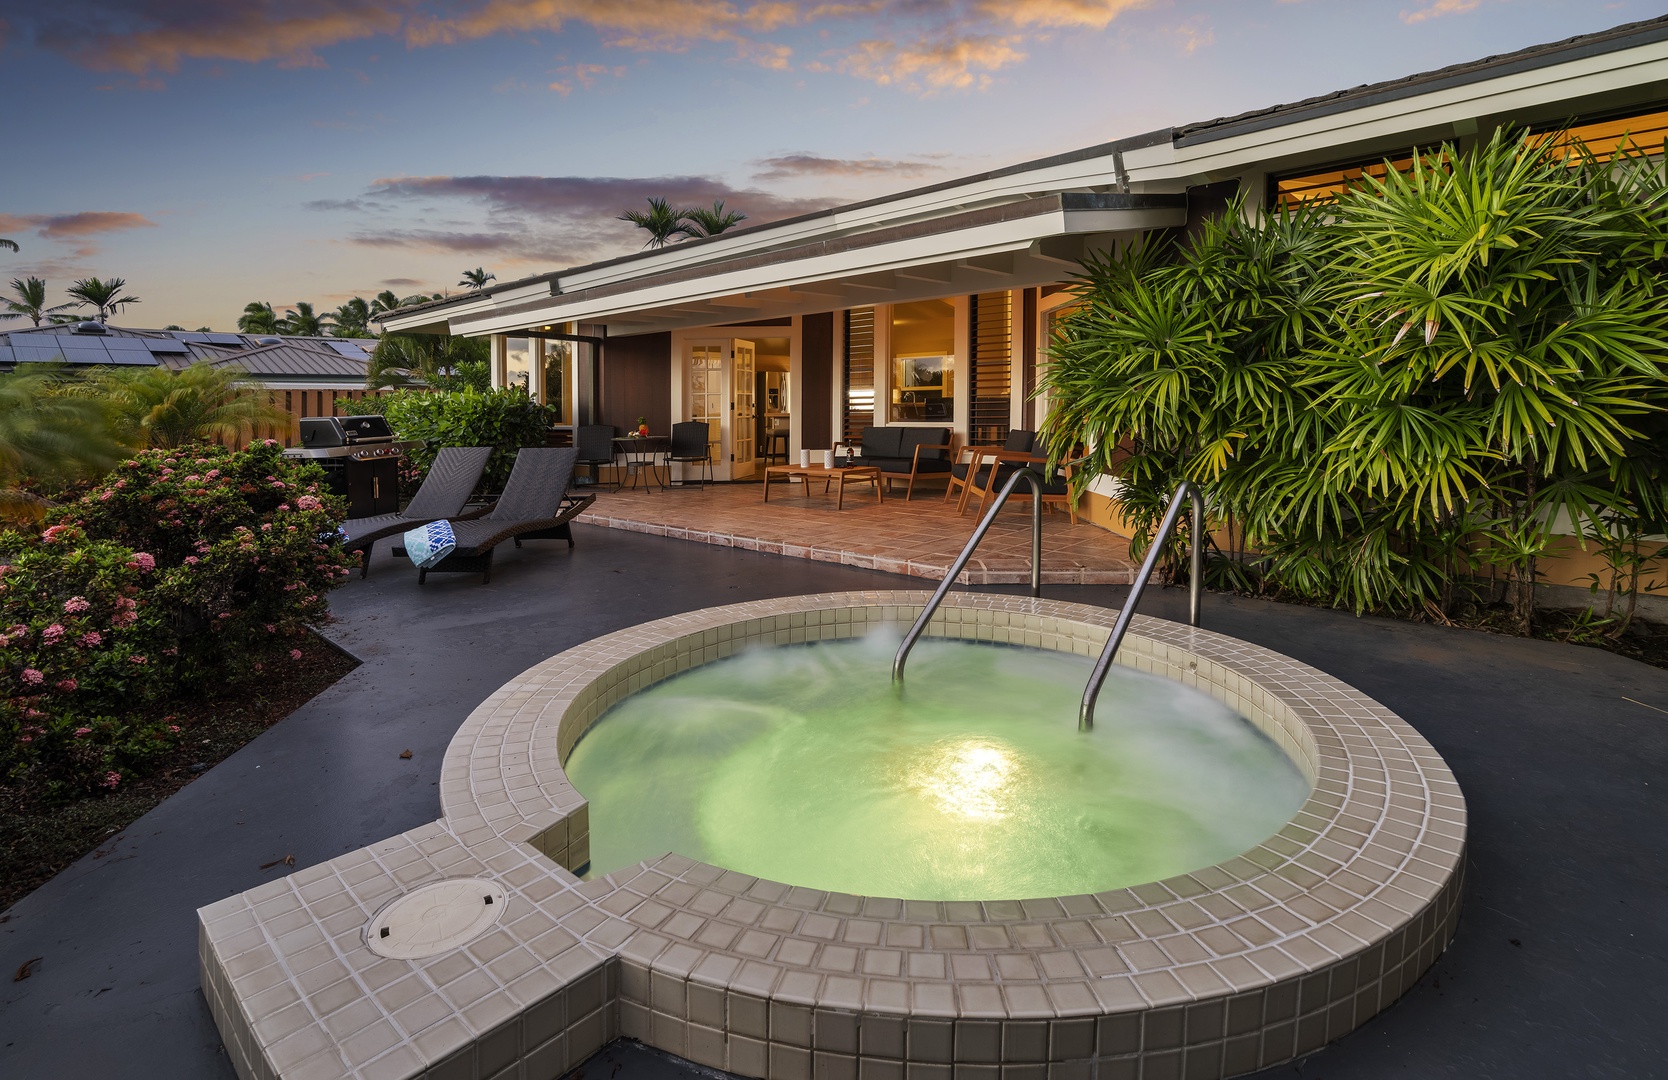 Kailua Kona Vacation Rentals, Pineapple House - Take a dip in the hot tub as the cooler evening temperatures set in